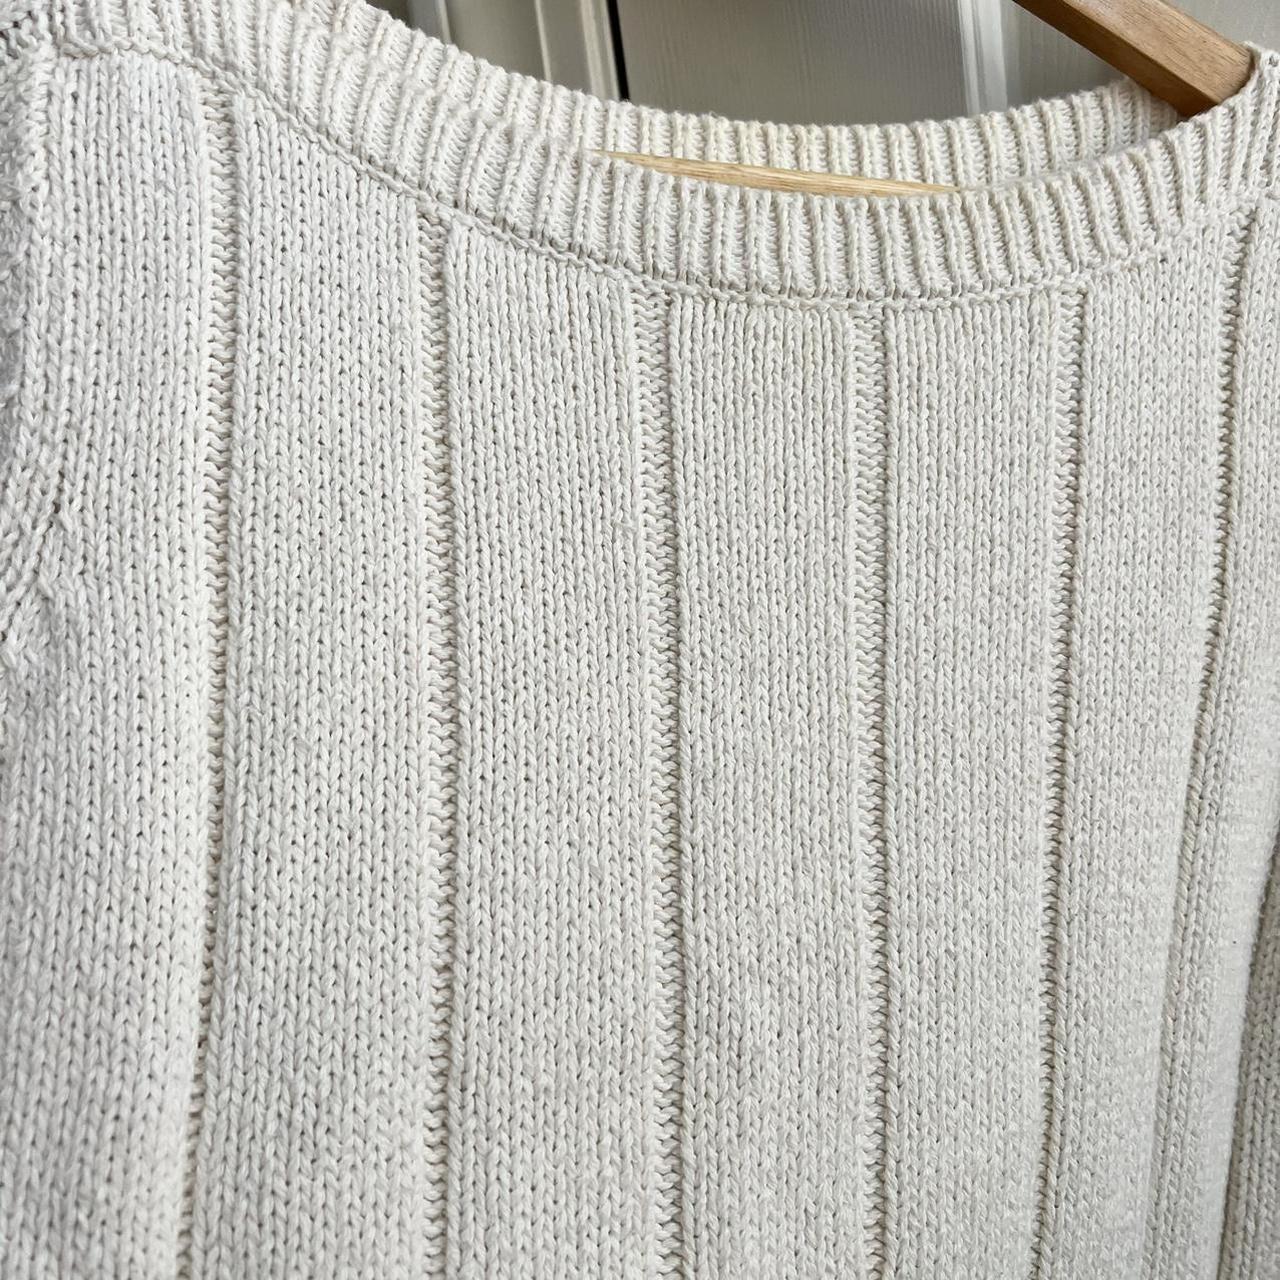 vintage cream knit sweater from the 90s 🤍 no tags,... - Depop